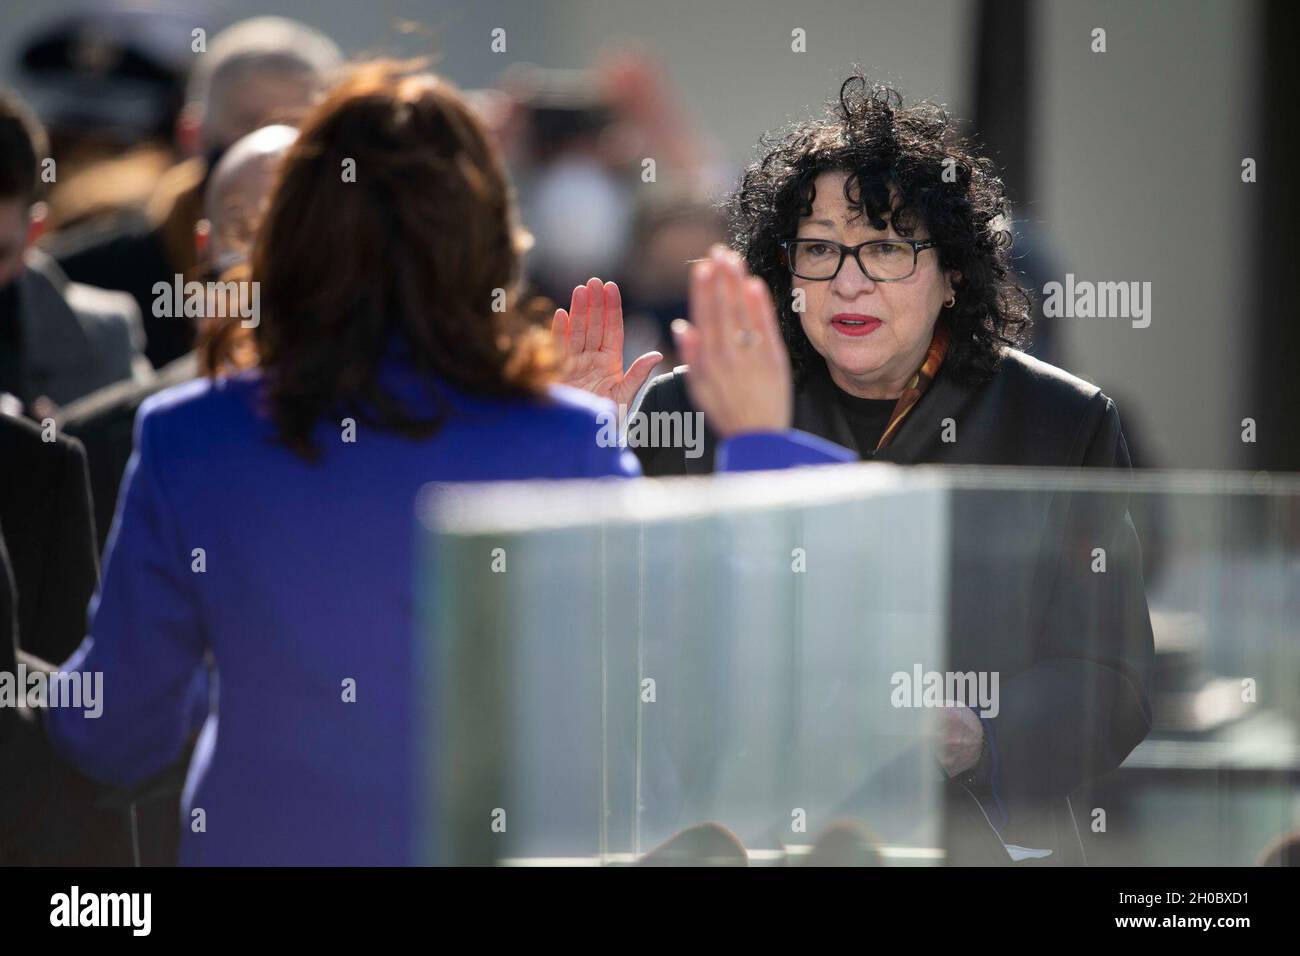 Supreme Court Justice Sonia Sotomayor swears in Vice President Kamala Harris into office during the 59th Presidential Inauguration ceremony in Washington, Jan. 20, 2021. President Joe Biden and Vice President Kamala Harris took the oath of office on the West Front of the U.S. Capitol. Stock Photo